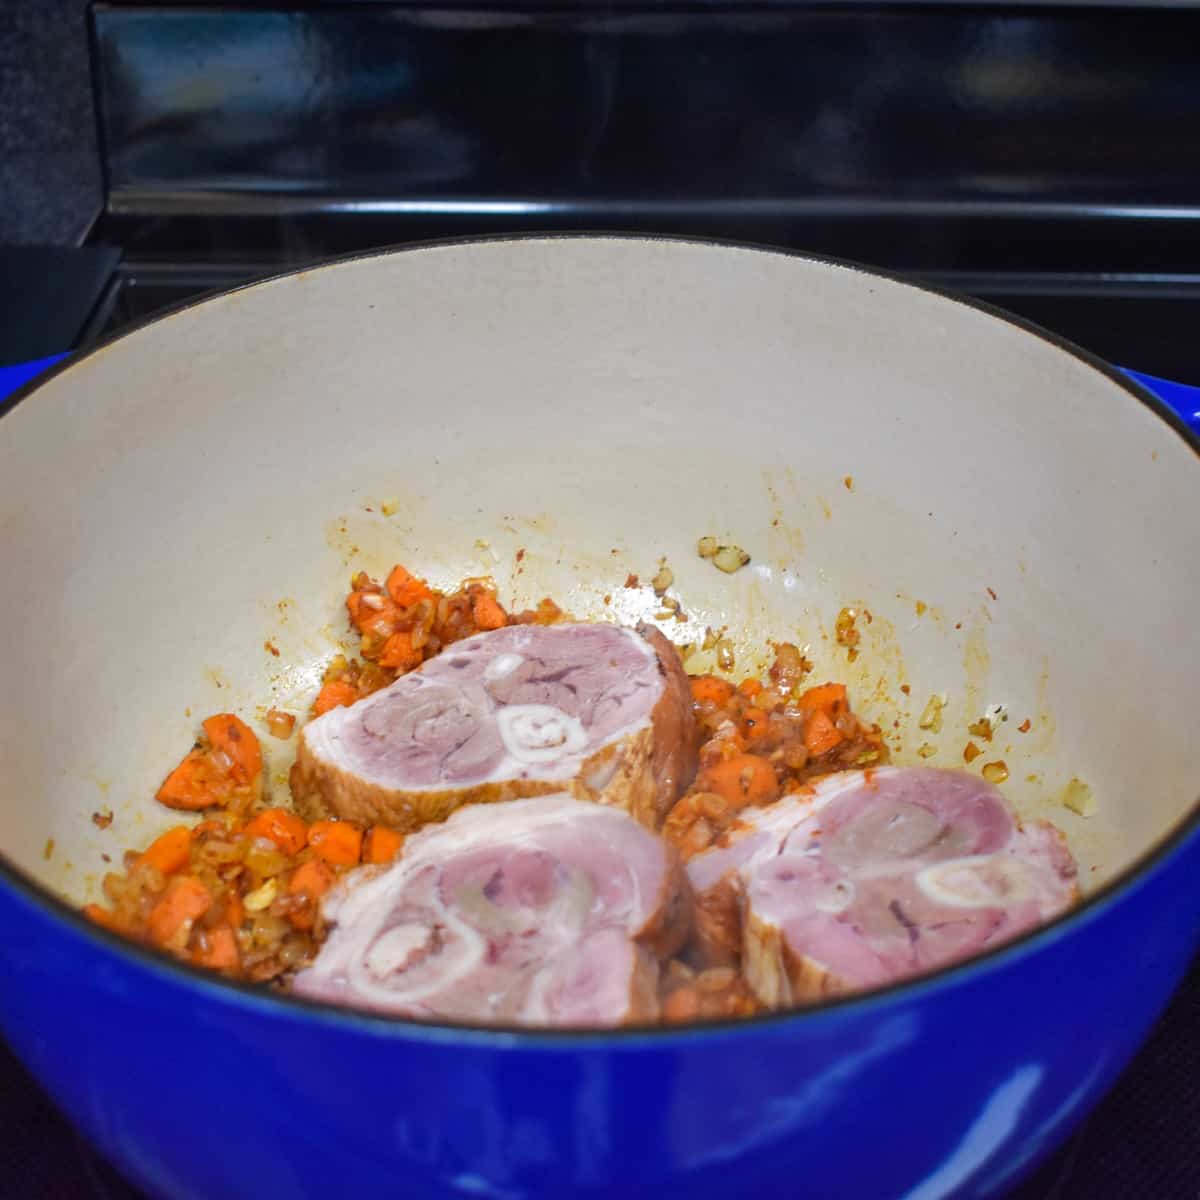 An image of three sliced ham shank pieces on cooked vegetables in a large blue pot.